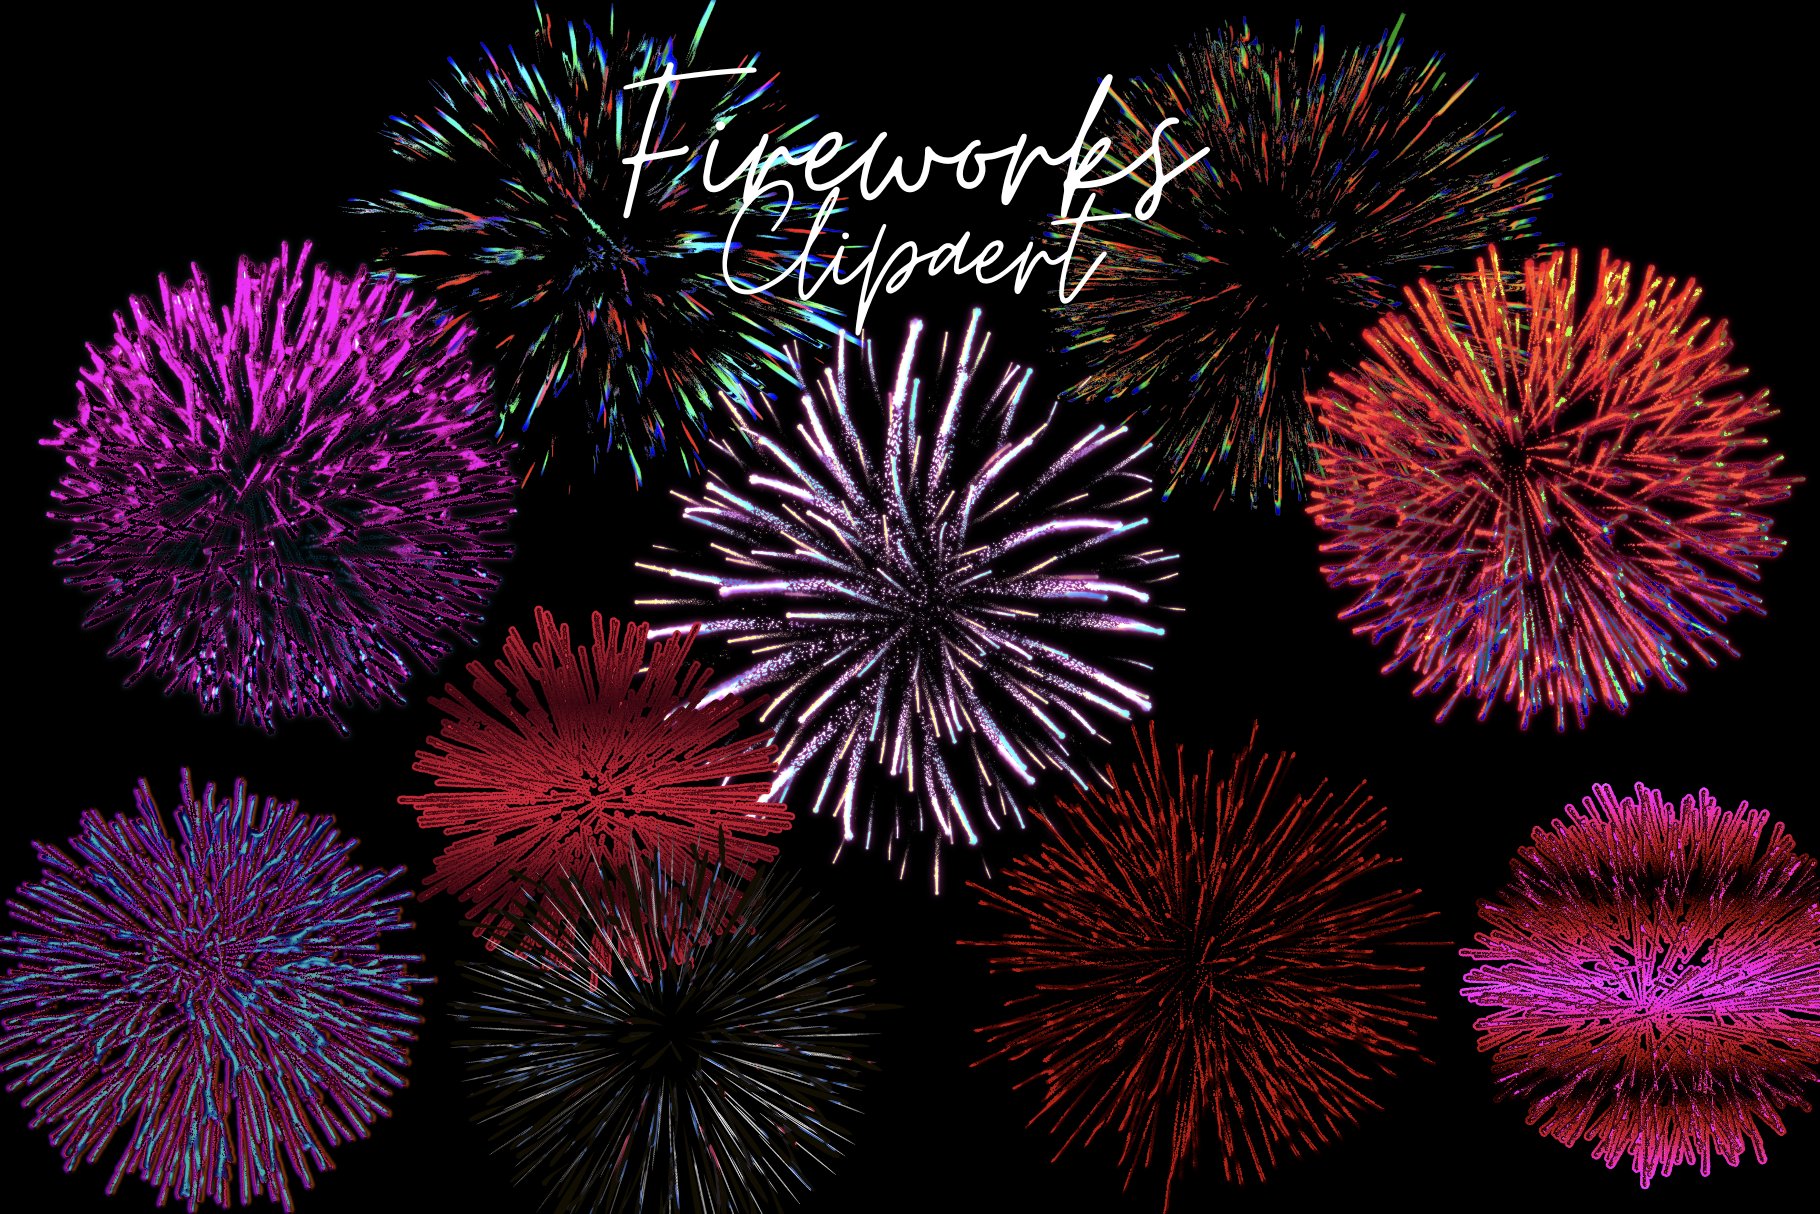 Fireworks Overlays cover image.